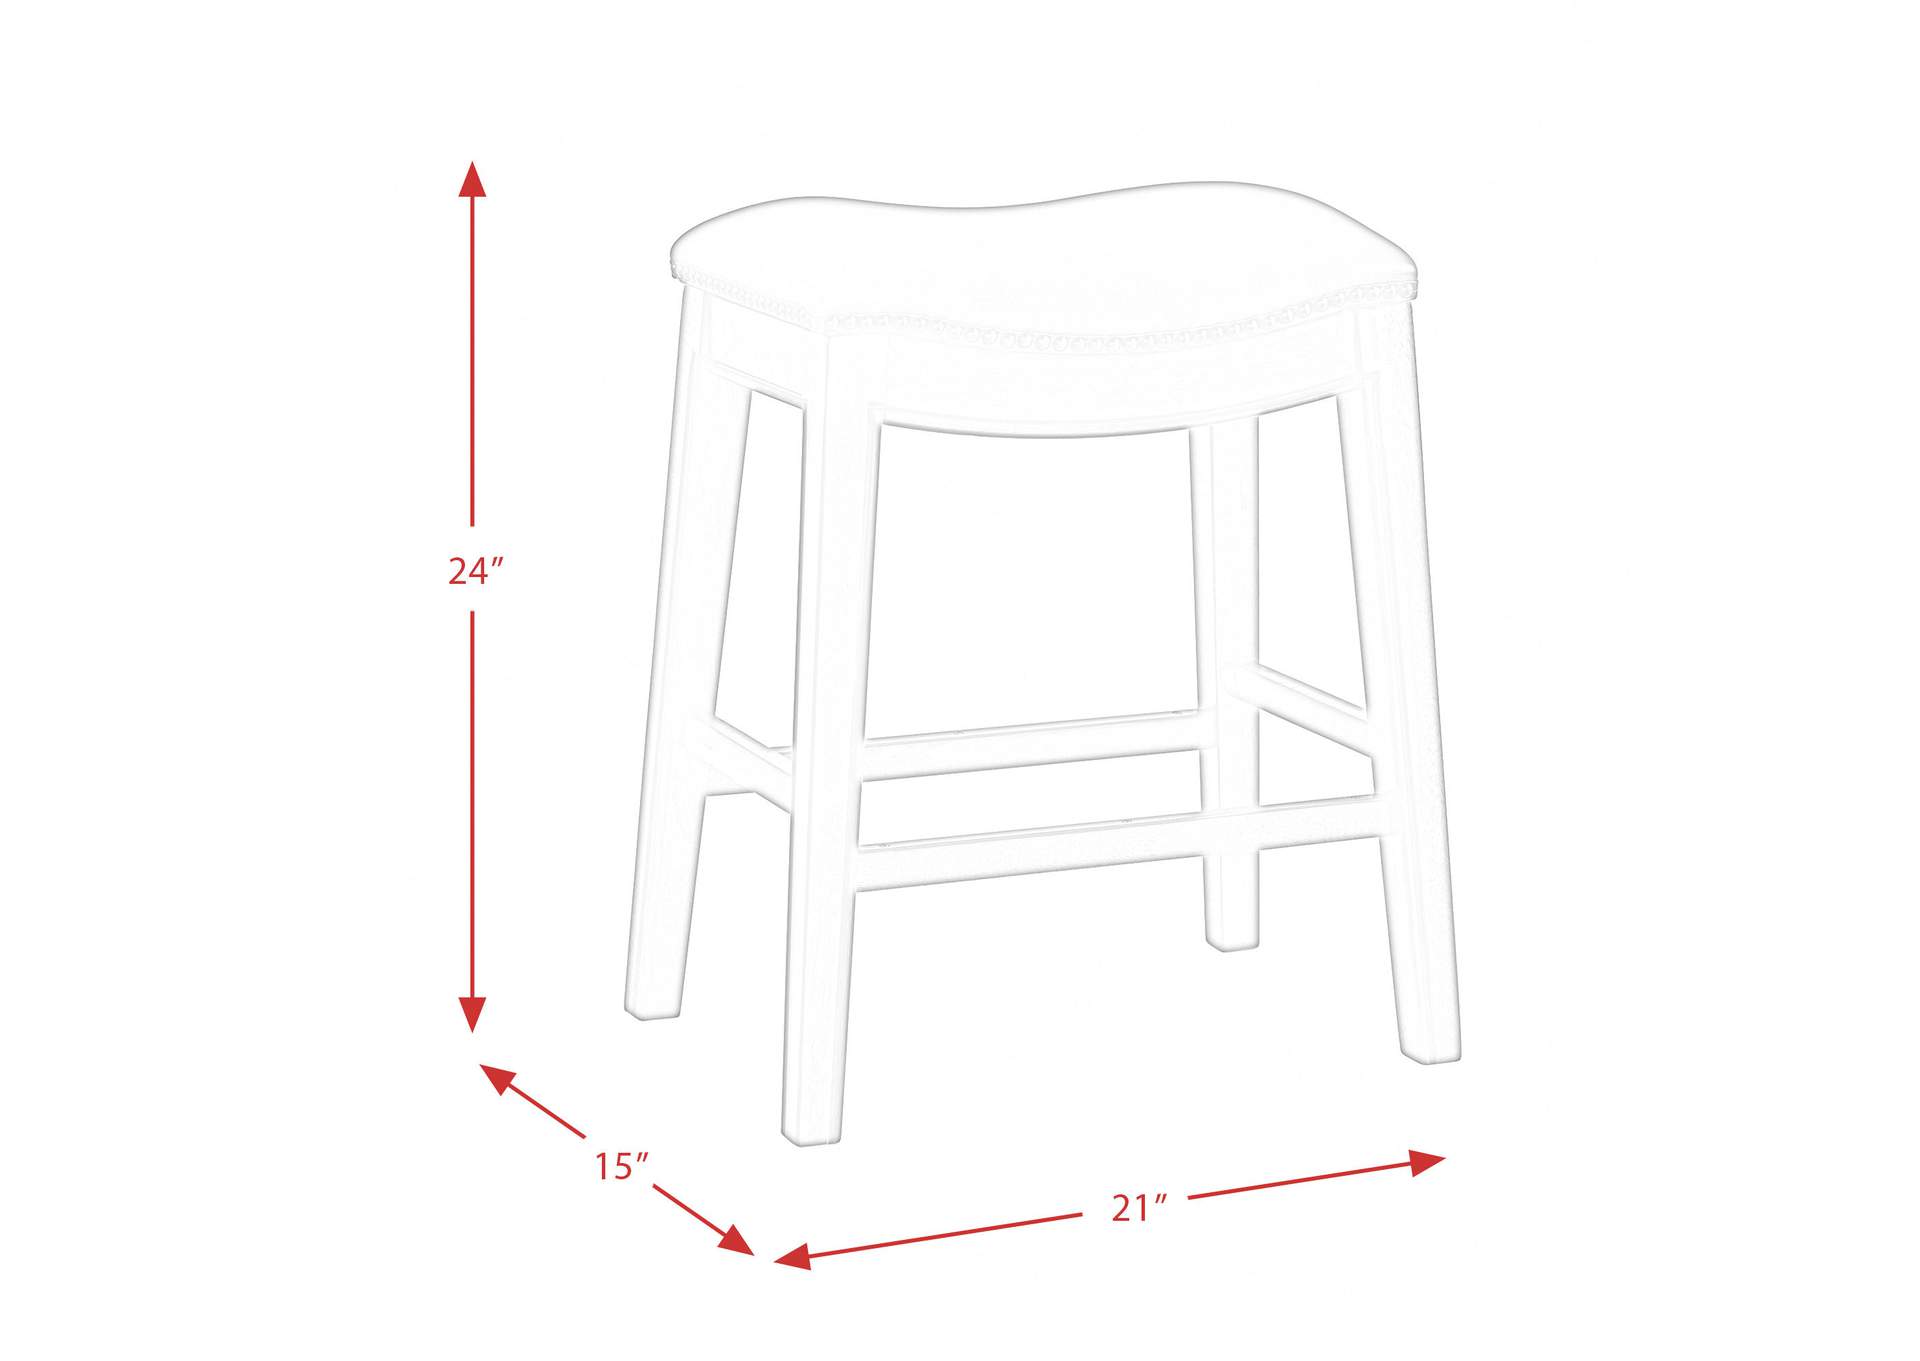 Fiesta 24" Backless Counter Height Stool in Red,Elements